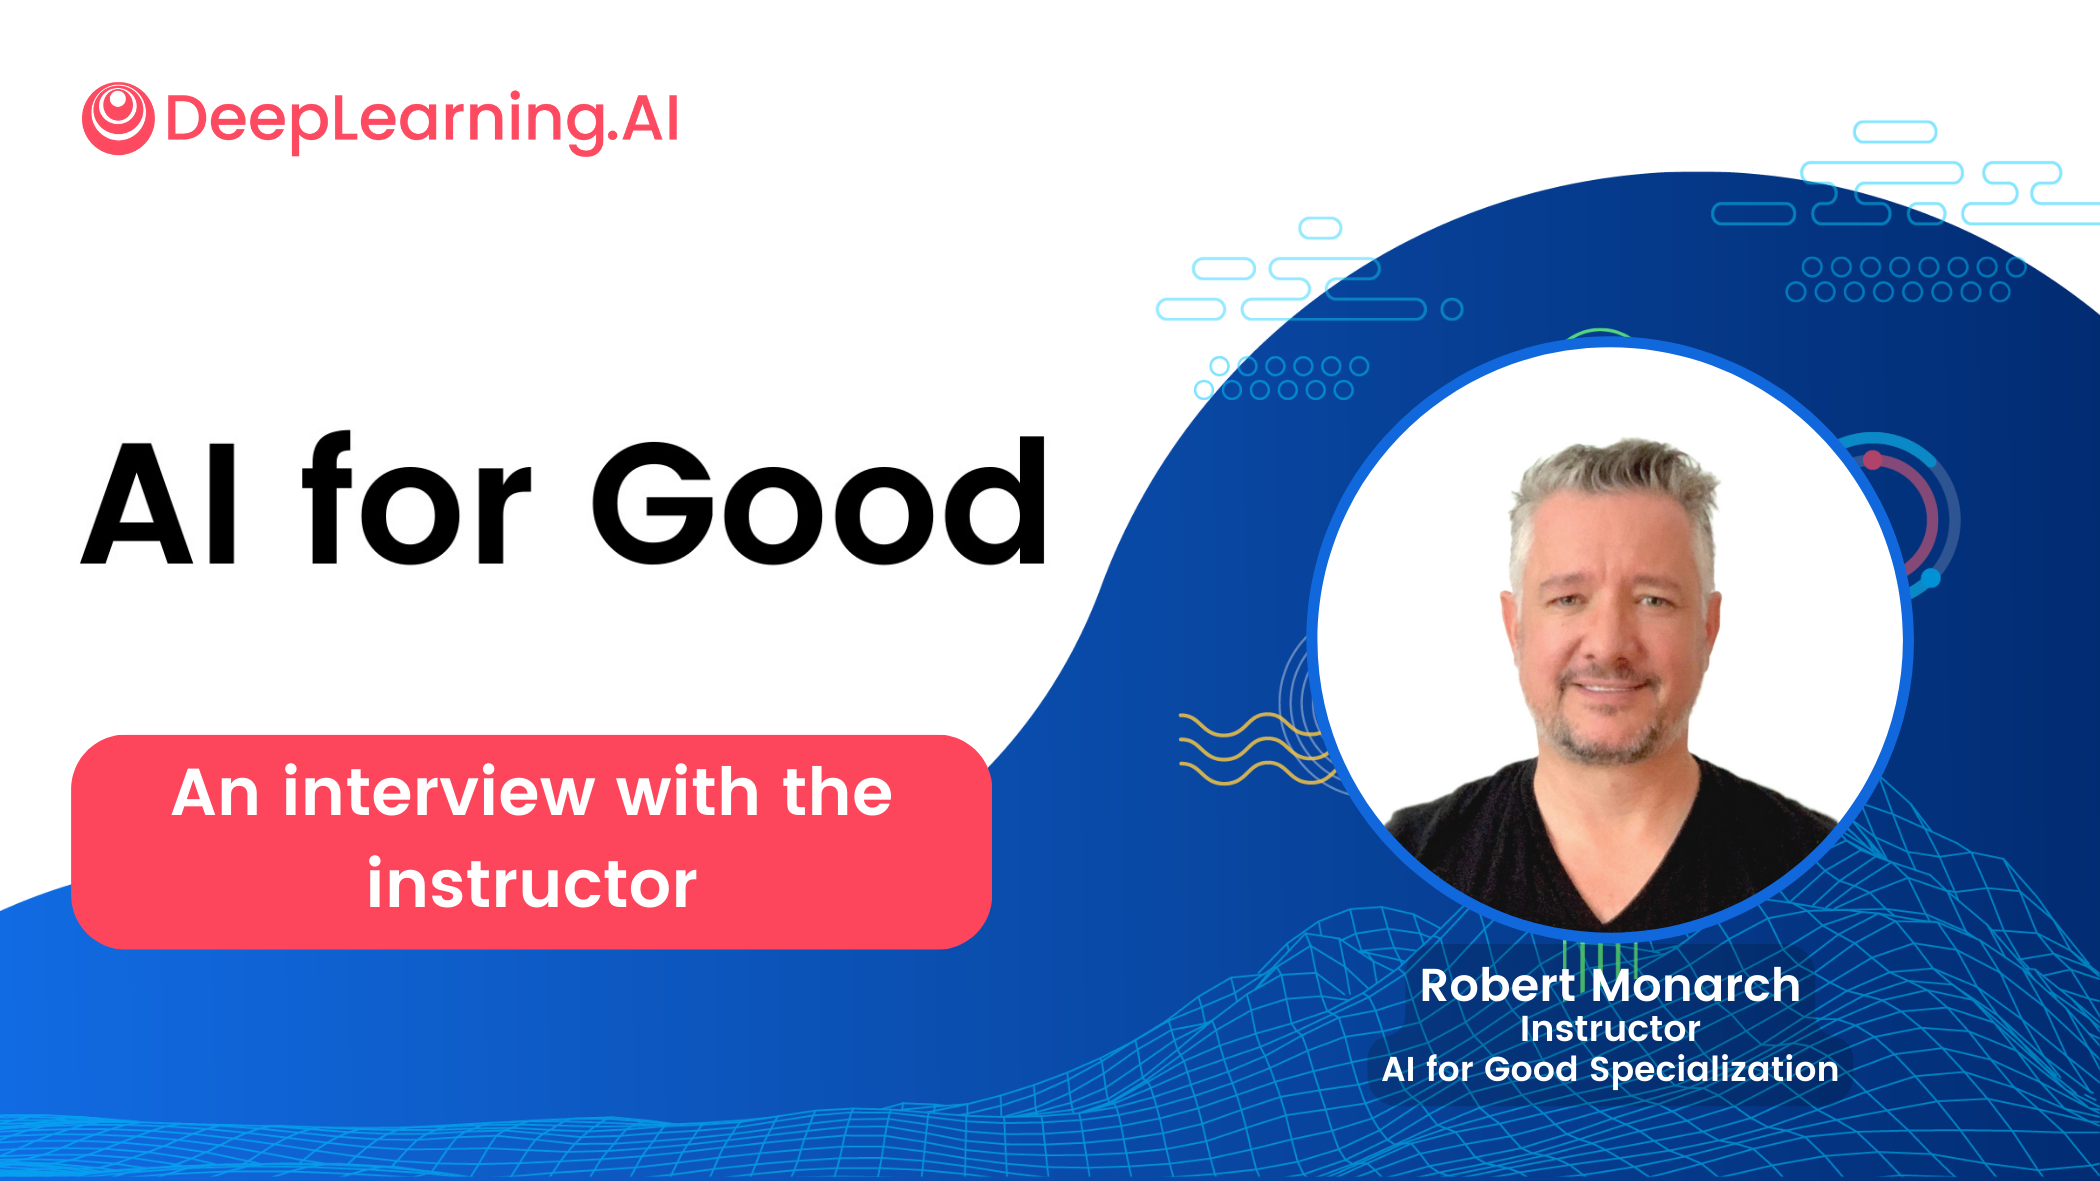 Answers from the instructor: AI for Good’s Robert Monarch